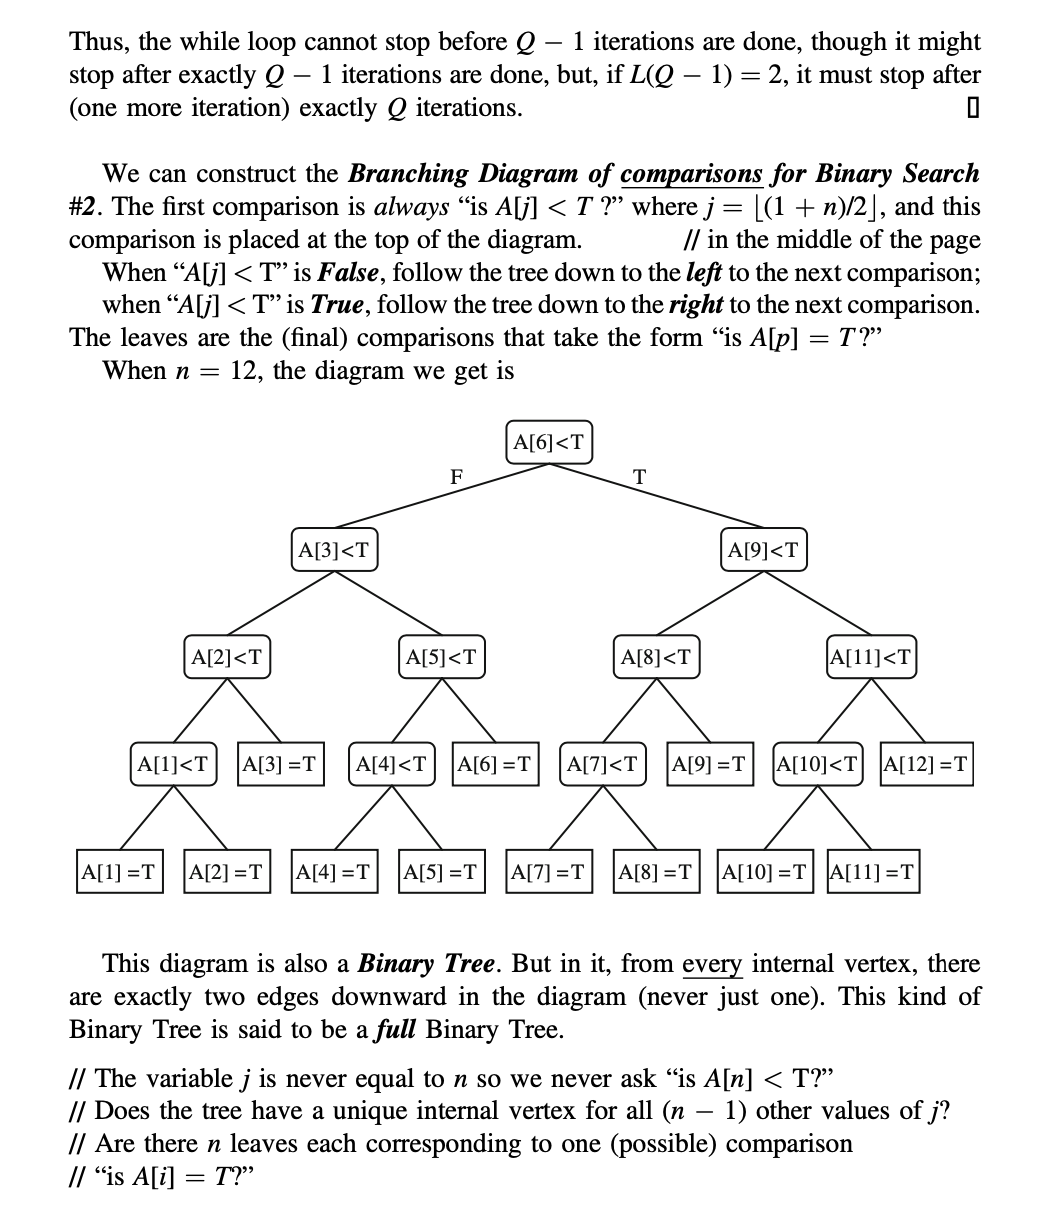 Thus, the while loop cannot stop before Q
stop after exactly Q
(one more iteration) exactly Q iterations.
1 iterations are done, though it might
- 1 iterations are done, but, if L(Q – 1) = 2, it must stop after
We can construct the Branching Diagram of comparisons for Binary Search
#2. The first comparison is always "is A[j] < T ?" where j = [(1 + n)/2], and this
comparison is placed at the top of the diagram.
When “A[j] < T" is False, follow the tree down to the left to the next comparison;
when “A[j] < T" is True, follow the tree down to the right to the next comparison.
The leaves are the (final) comparisons that take the form "is A[p]
When n =
// in the middle of the page
T?"
12, the diagram we get is
A[6]<T
F
A[3]<T
A[9]<T
A[2]<T
A[5]<T
A[8]<T
A[11]<T
A[1]<T
A[3] =T
A[4]<T
A[6] =T
A[7]<T
A[9] =T
A[10]<T A[12] =T
A[1] =T
A[2] =T
|A[4] =T
A[5] =T
A[7] =T
A[8] =T
|A[10] =T A[11] =T
This diagram is also a Binary Tree. But in it, from every internal vertex, there
are exactly two edges downward in the diagram (never just one). This kind of
Binary Tree is said to be a full Binary Tree.
// The variable j is never equal to n so we never ask “is A[n] < T?"
// Does the tree have a unique internal vertex for all (n
// Are there n leaves each corresponding to one (possible) comparison
// "is A[i] = T?"
1) other values of j?
